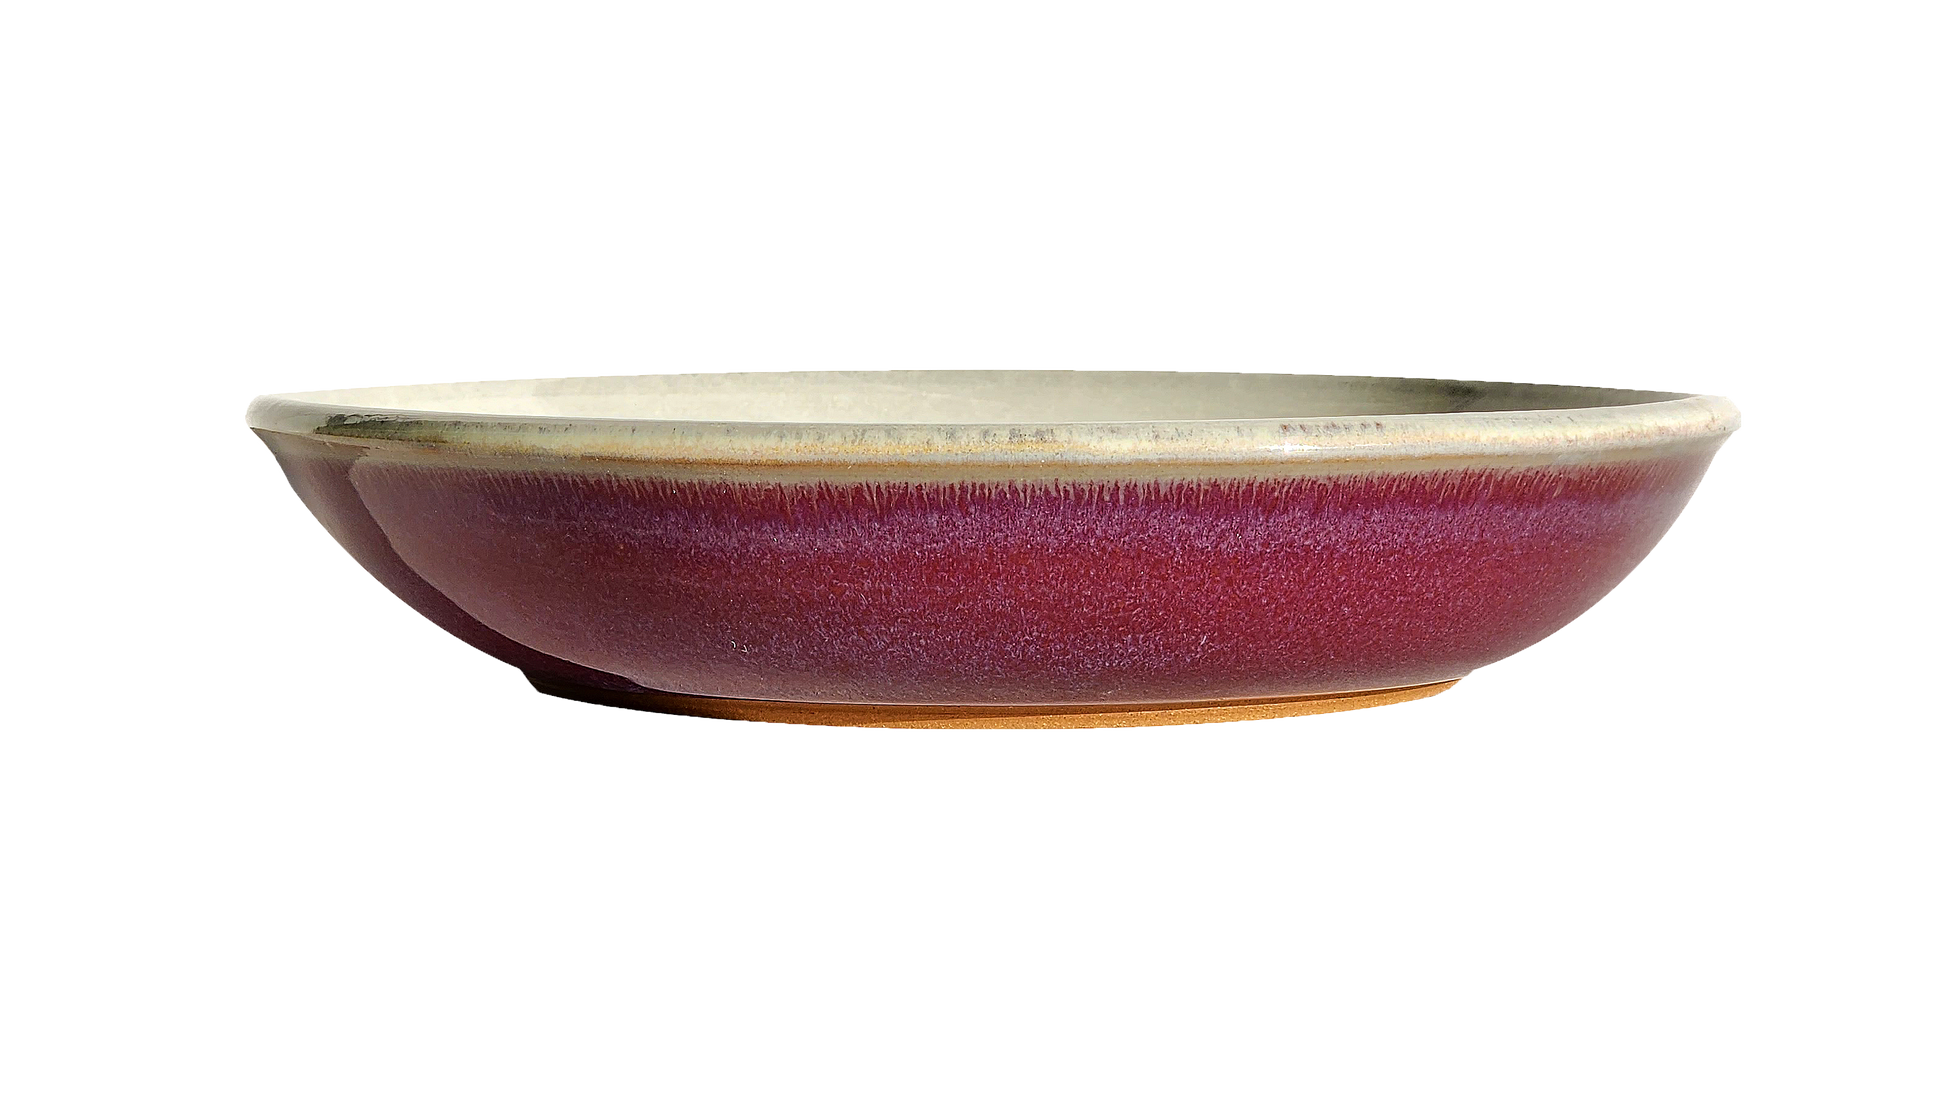 Image: A red pasta dish measuring 10 inches in diameter. Its bold color and smooth glazed surface add a touch of excitement to your dining experience, perfect for serving your favorite pasta dishes.